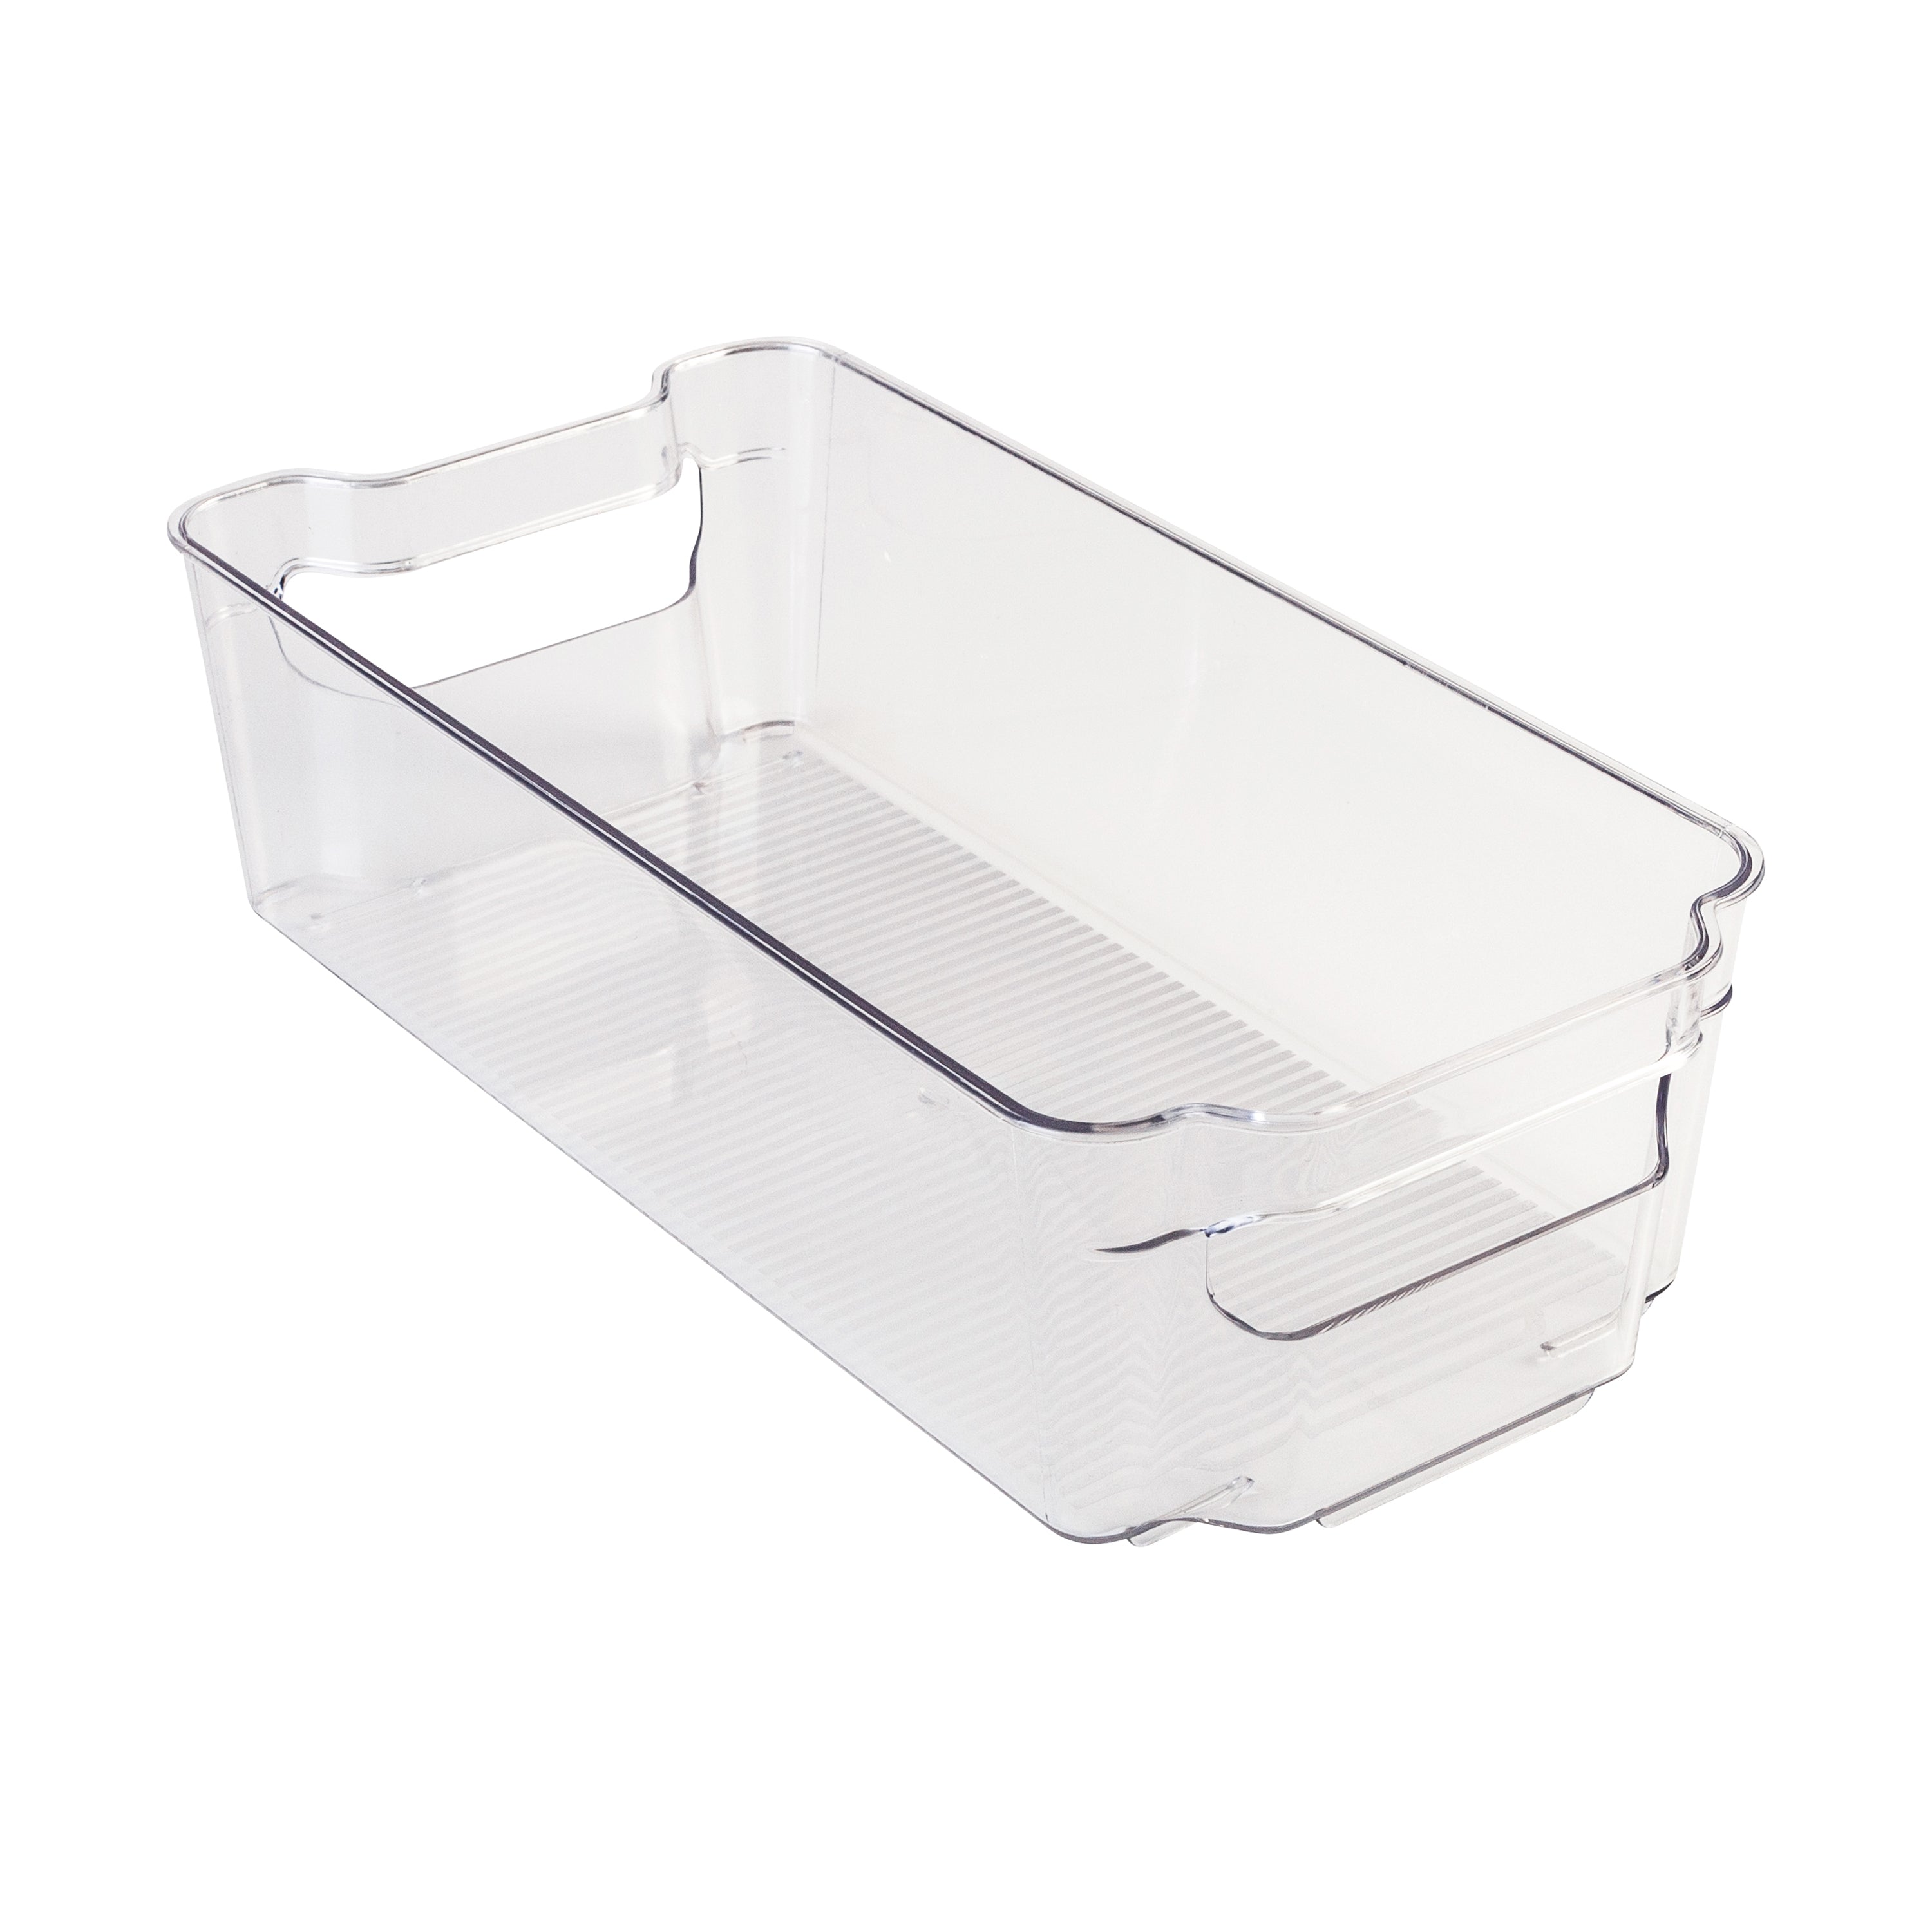 Honey-Can-Do Clear BPA-Free Stackable Refrigerator Organizer Bins (Set of 4)